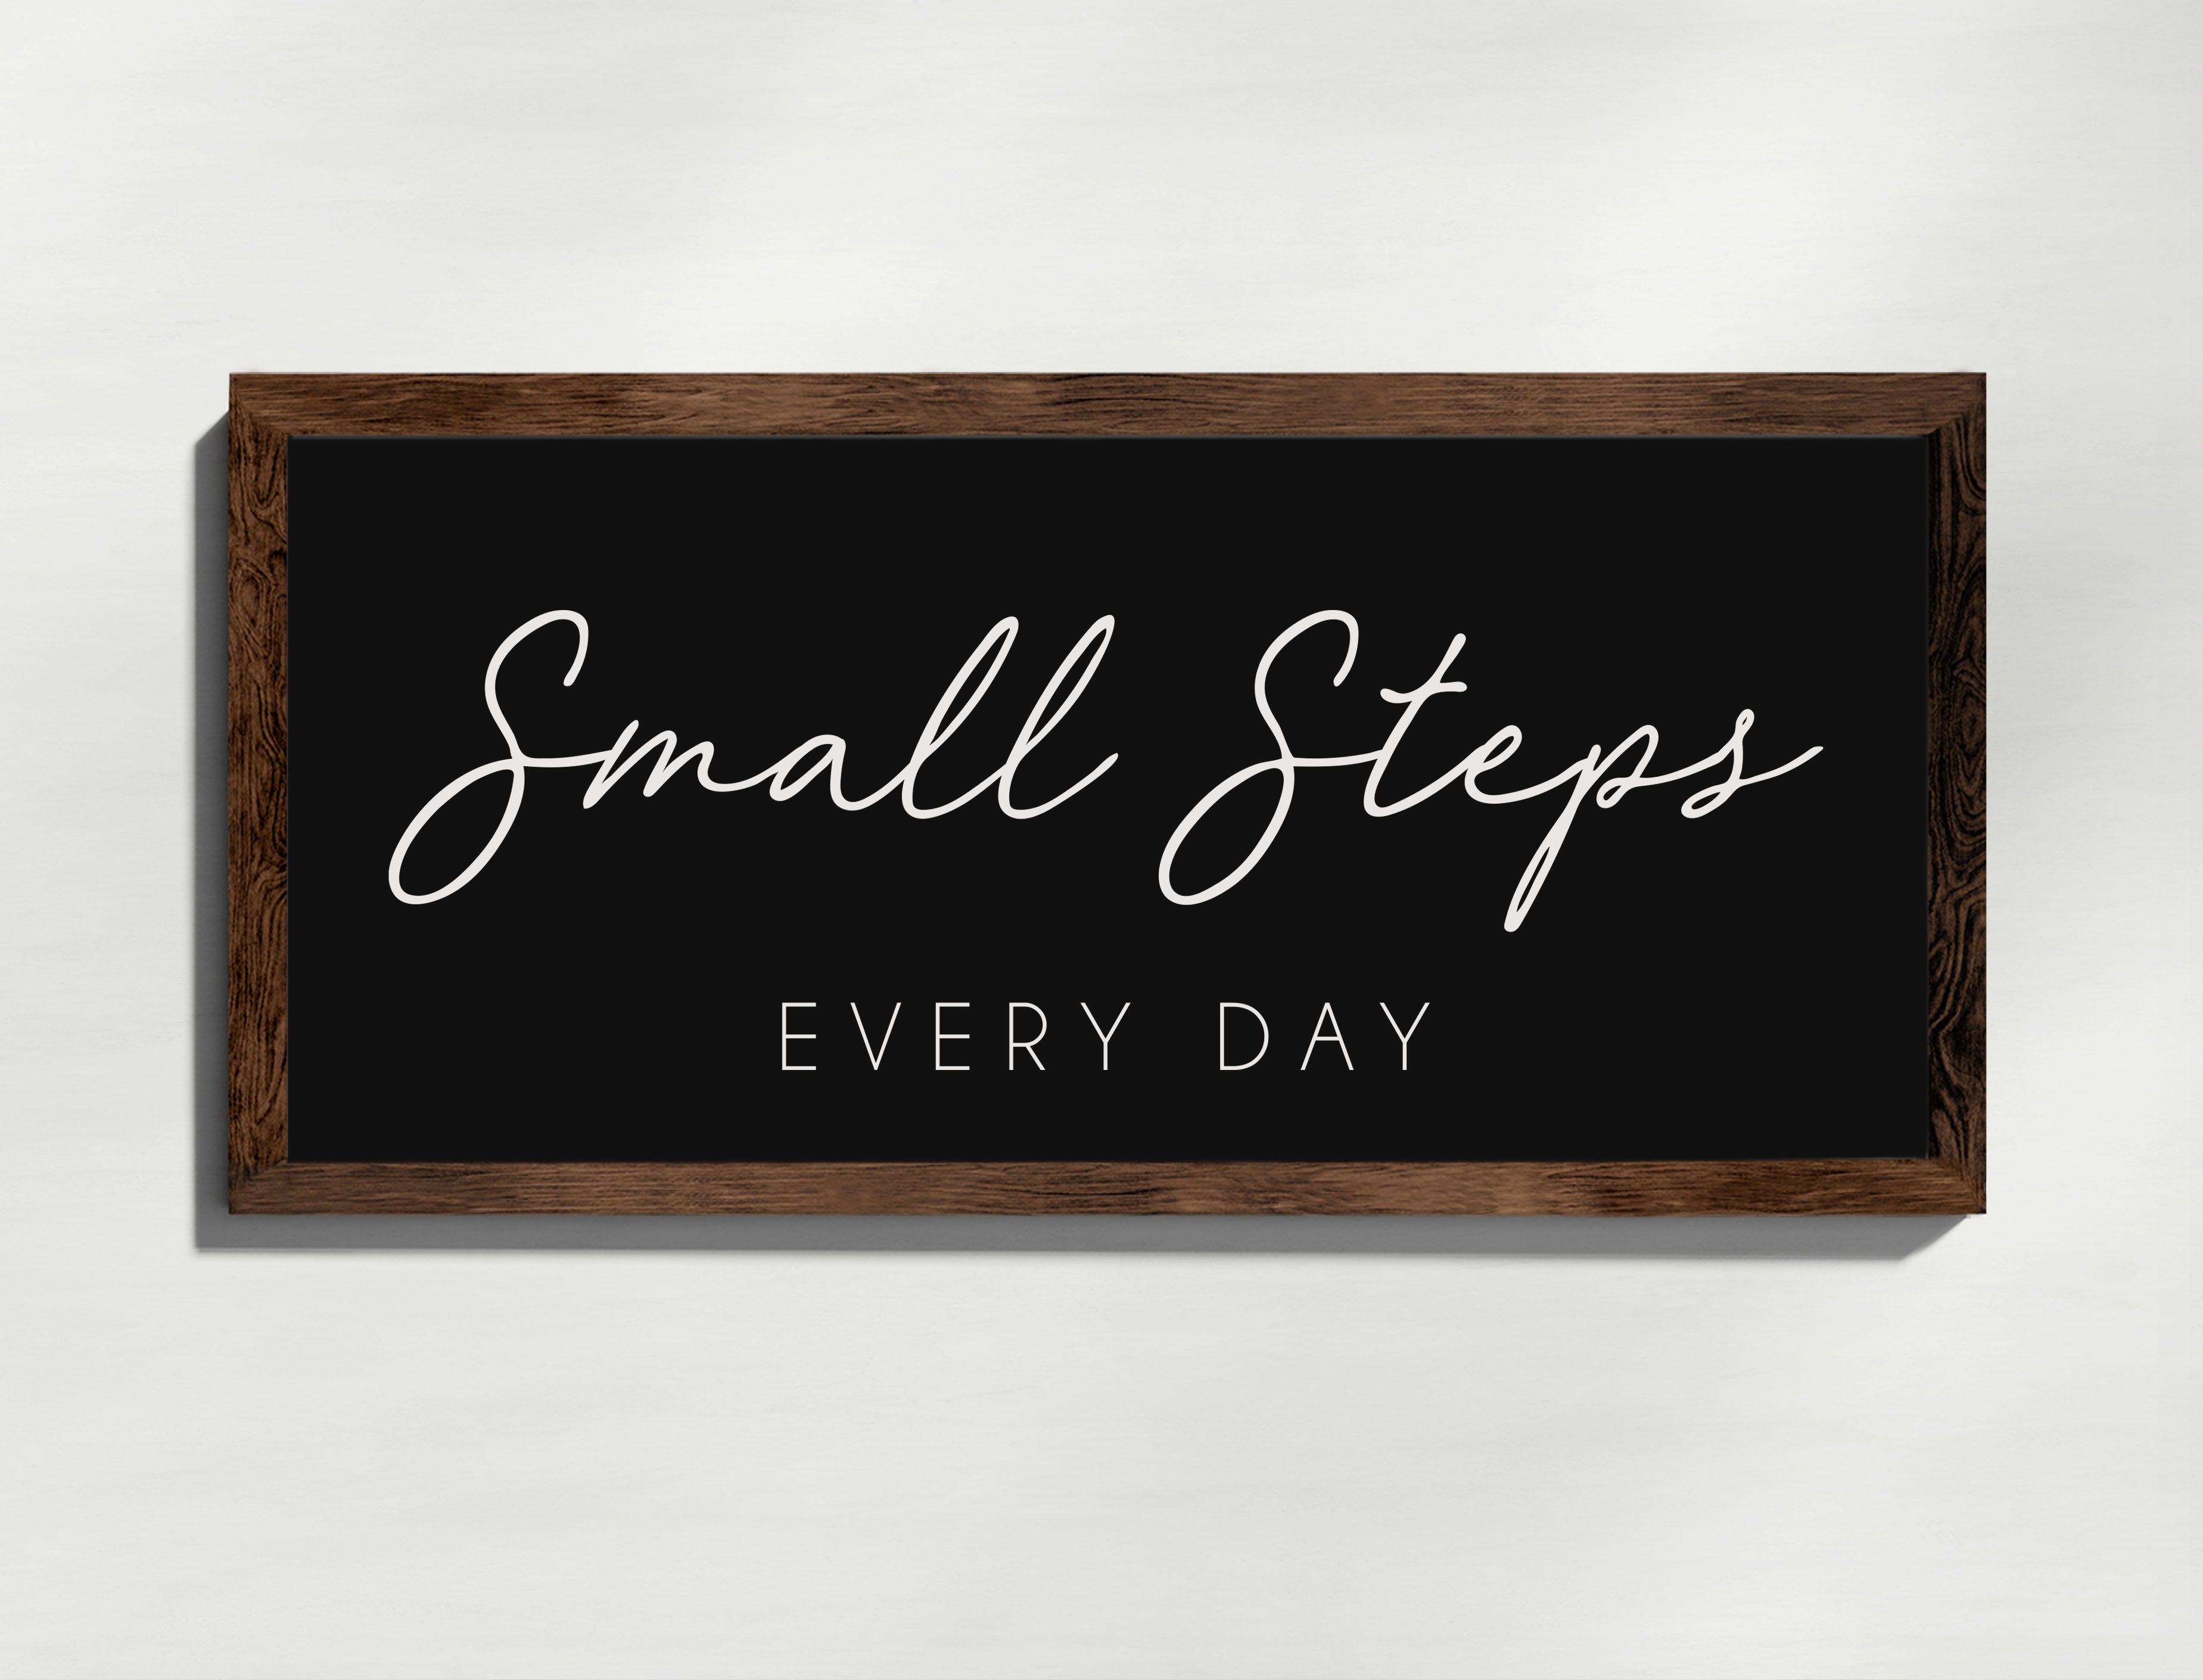 Small Steps Every Day - Wood Framed Wall Decor Sign - TheDecorCollection